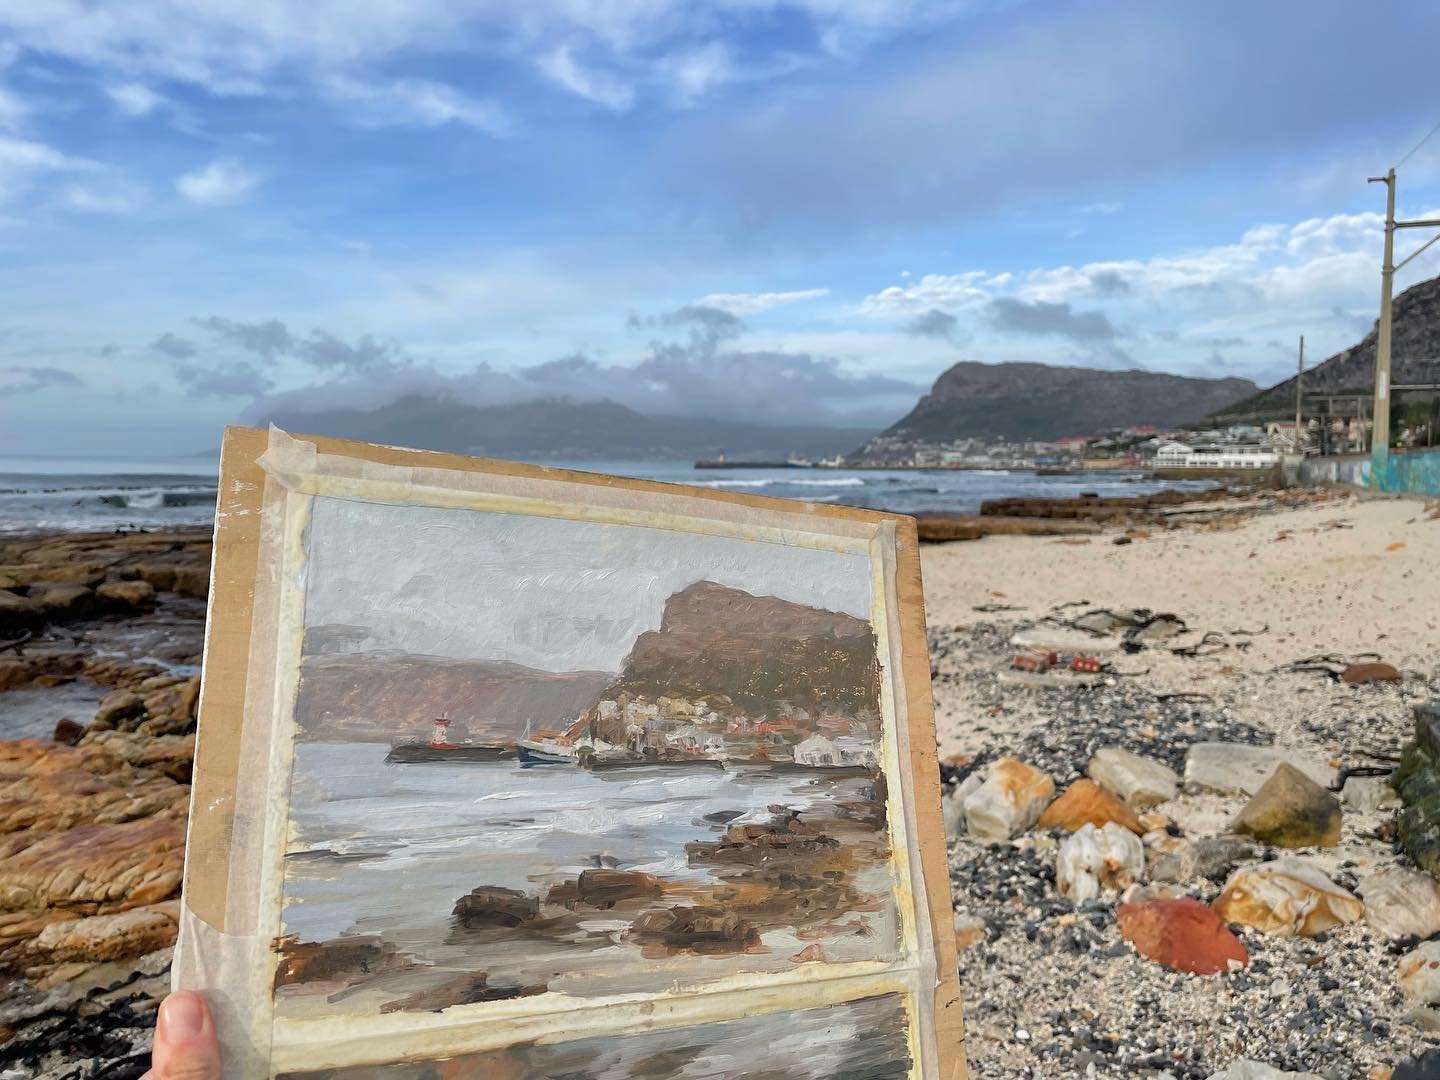 Le Papier getting me to paint scenes I don&rsquo;t normally&hellip; the view opposite the rising sun! I decided it was too bright to look into the sun, so Kalk Bay Harbour was it! We are so excited for our @salon104.art exhibition opening next Thursd